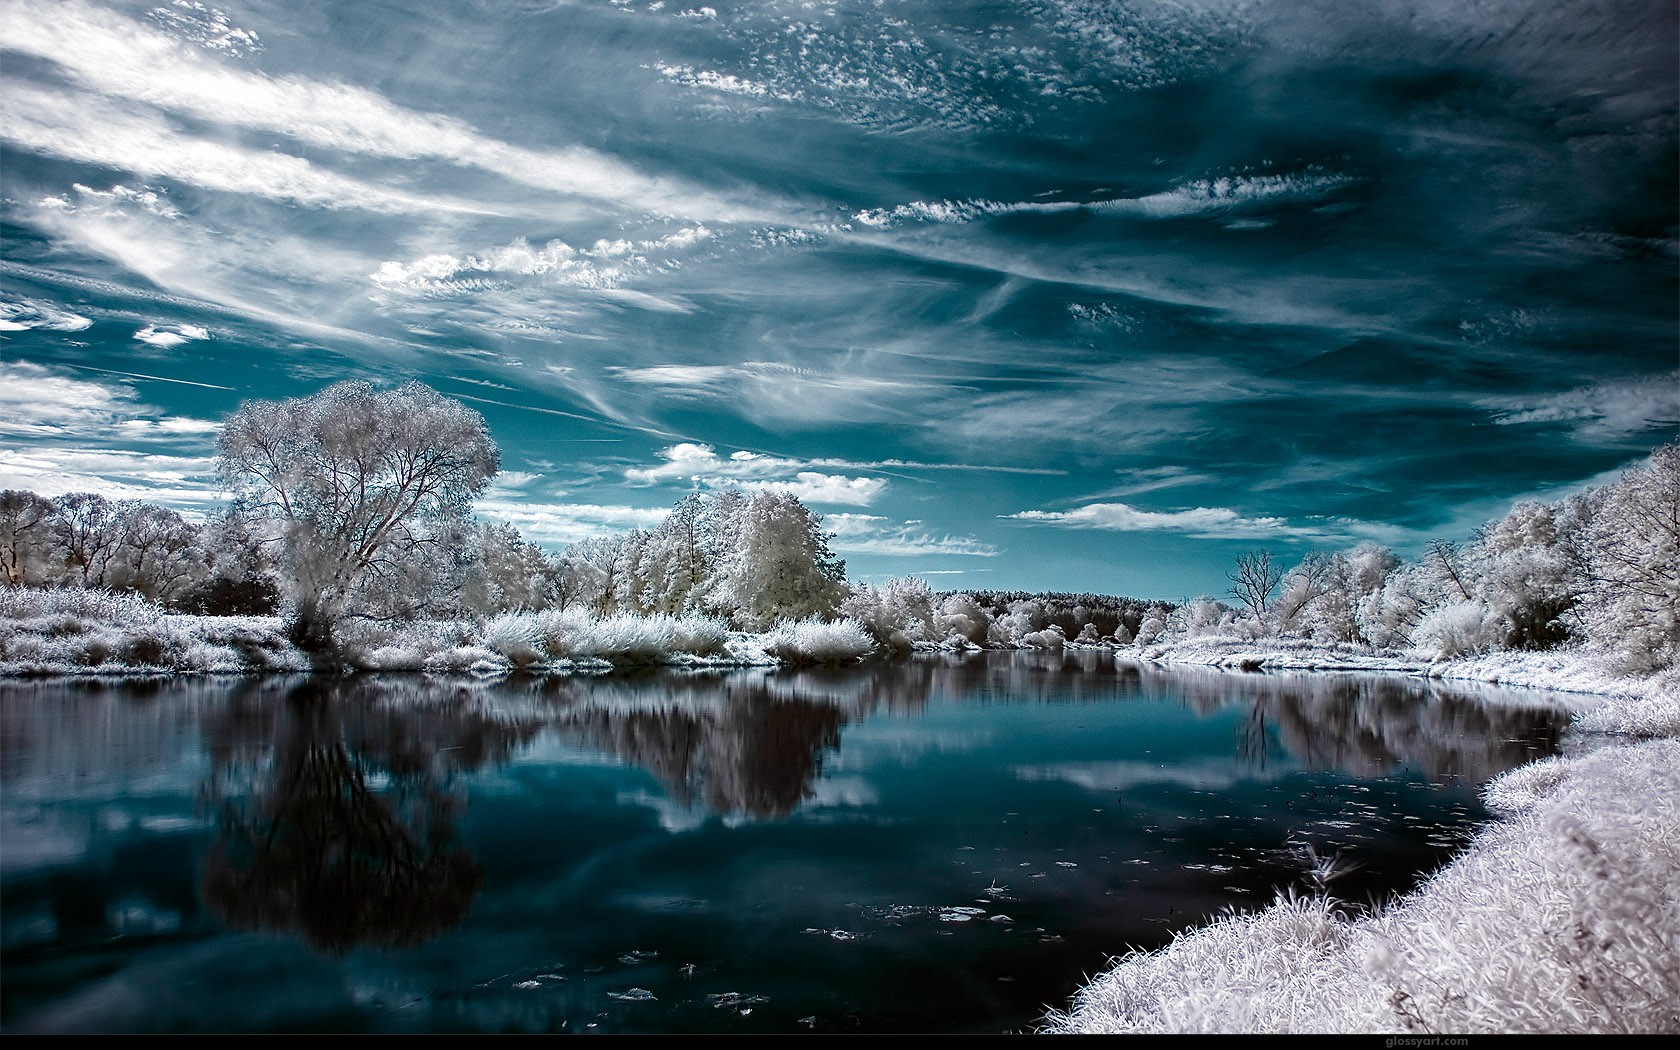 General 1680x1050 landscape water winter lake infrared sky clouds nature